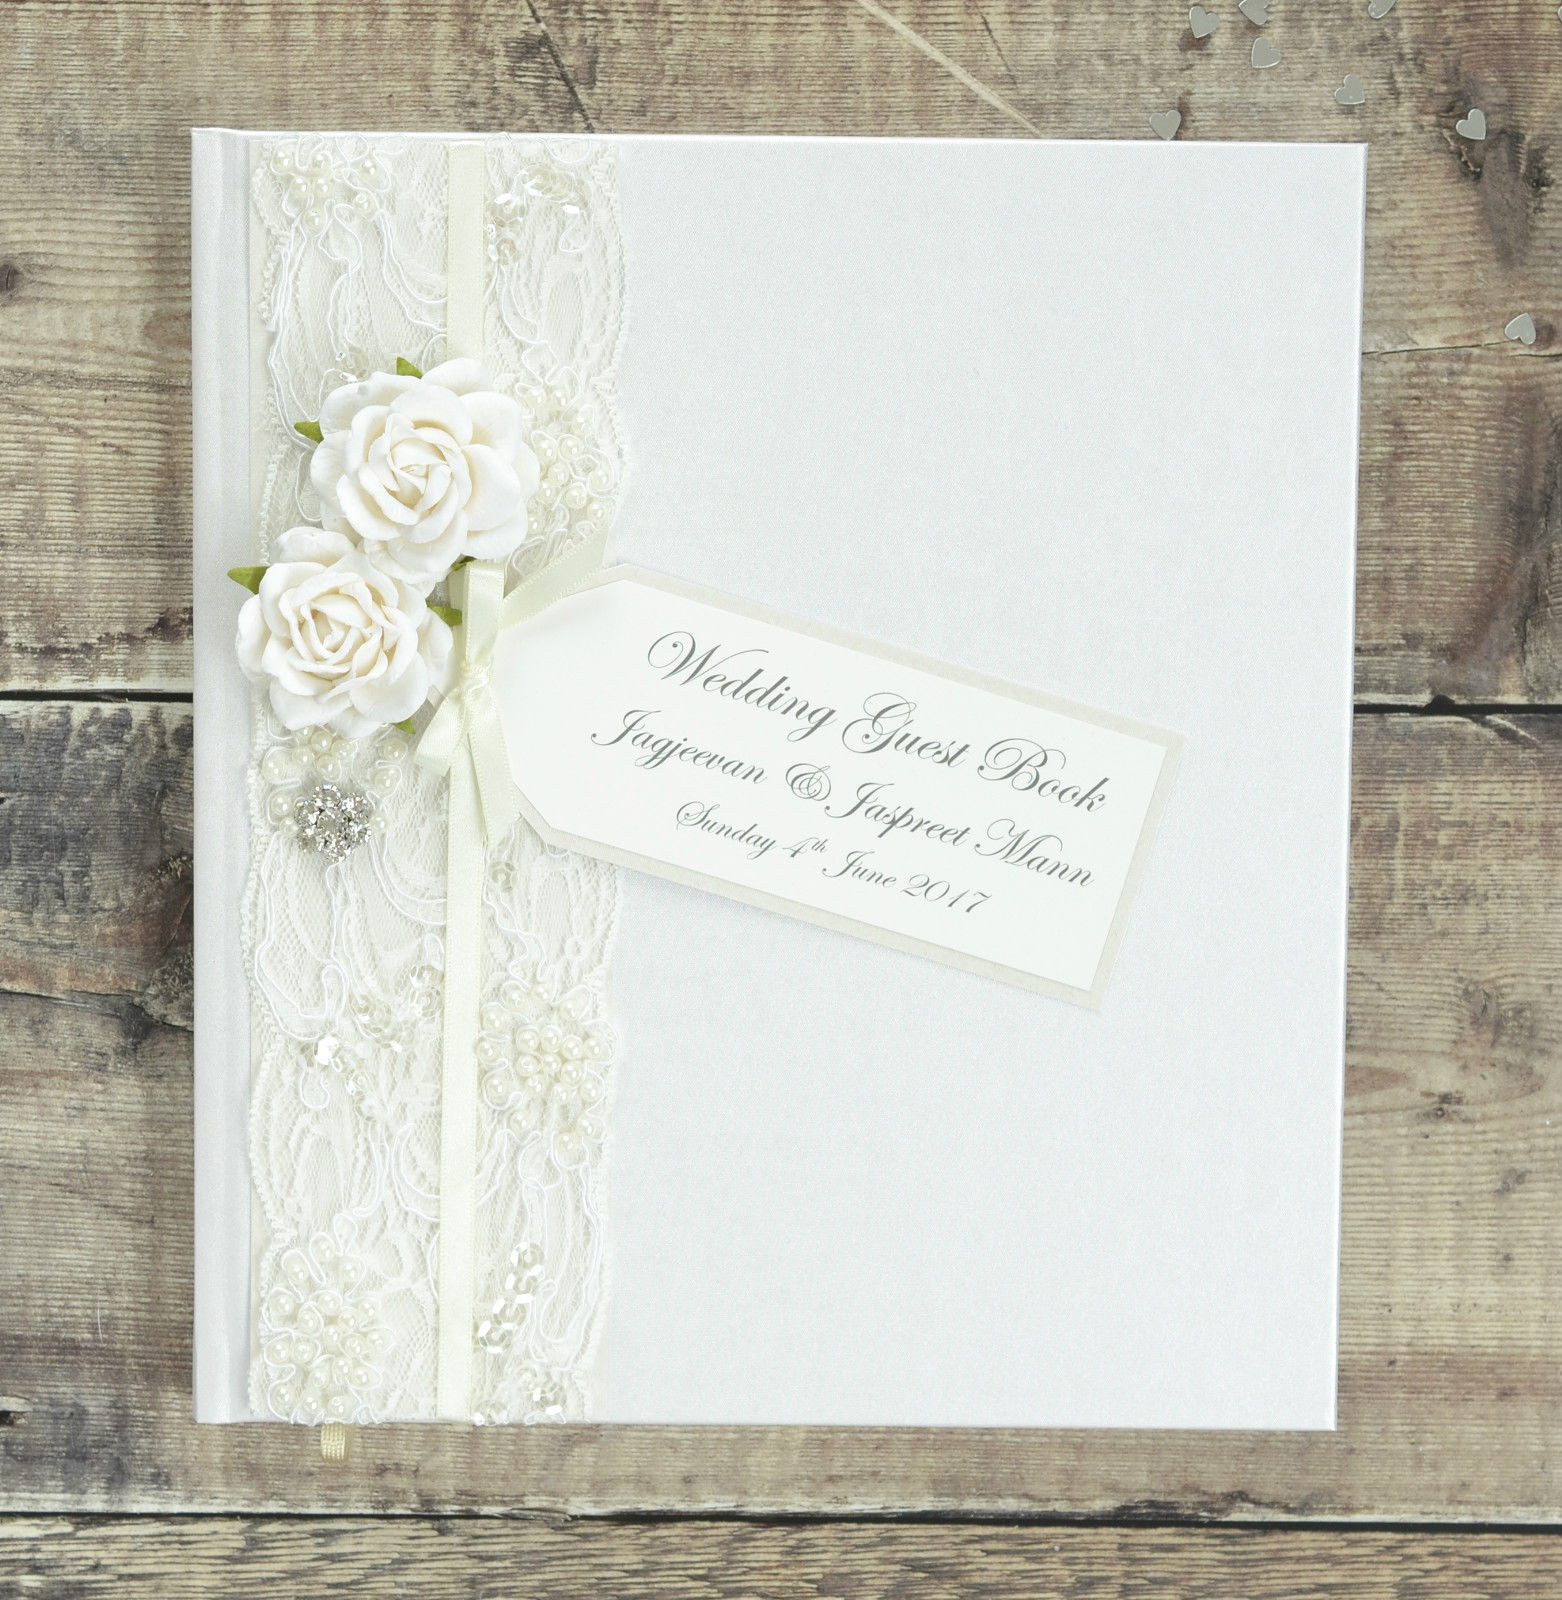 Large Guest Book Wedding
 Personalised Wedding Guest Book Luxury Ivory